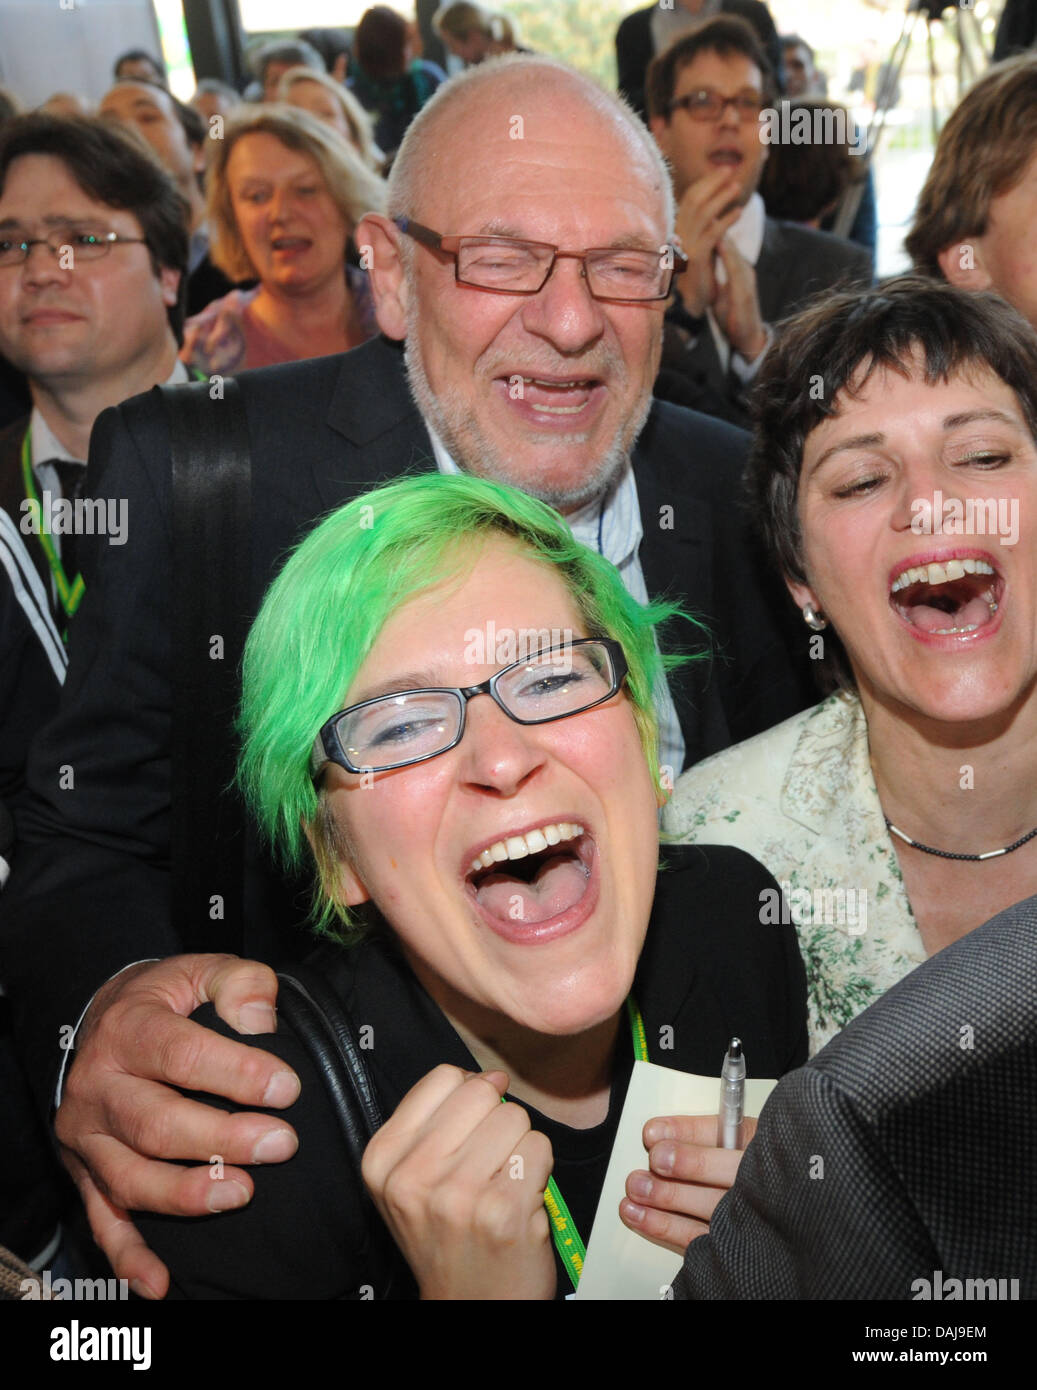 The picture shows supporters of the Green Party  celebrating after the first prognosis at the Landtag election in the state of Baden-Württemberg at the Landtag in Stuttgart, Germany on 27 March 2011. At the Landtag elections in Baden-Württember 7,8 million citizens are eligible to vote. 19 Parties with 684 candidates and 6 independent candidates have entered the elections. PHOTO: P Stock Photo